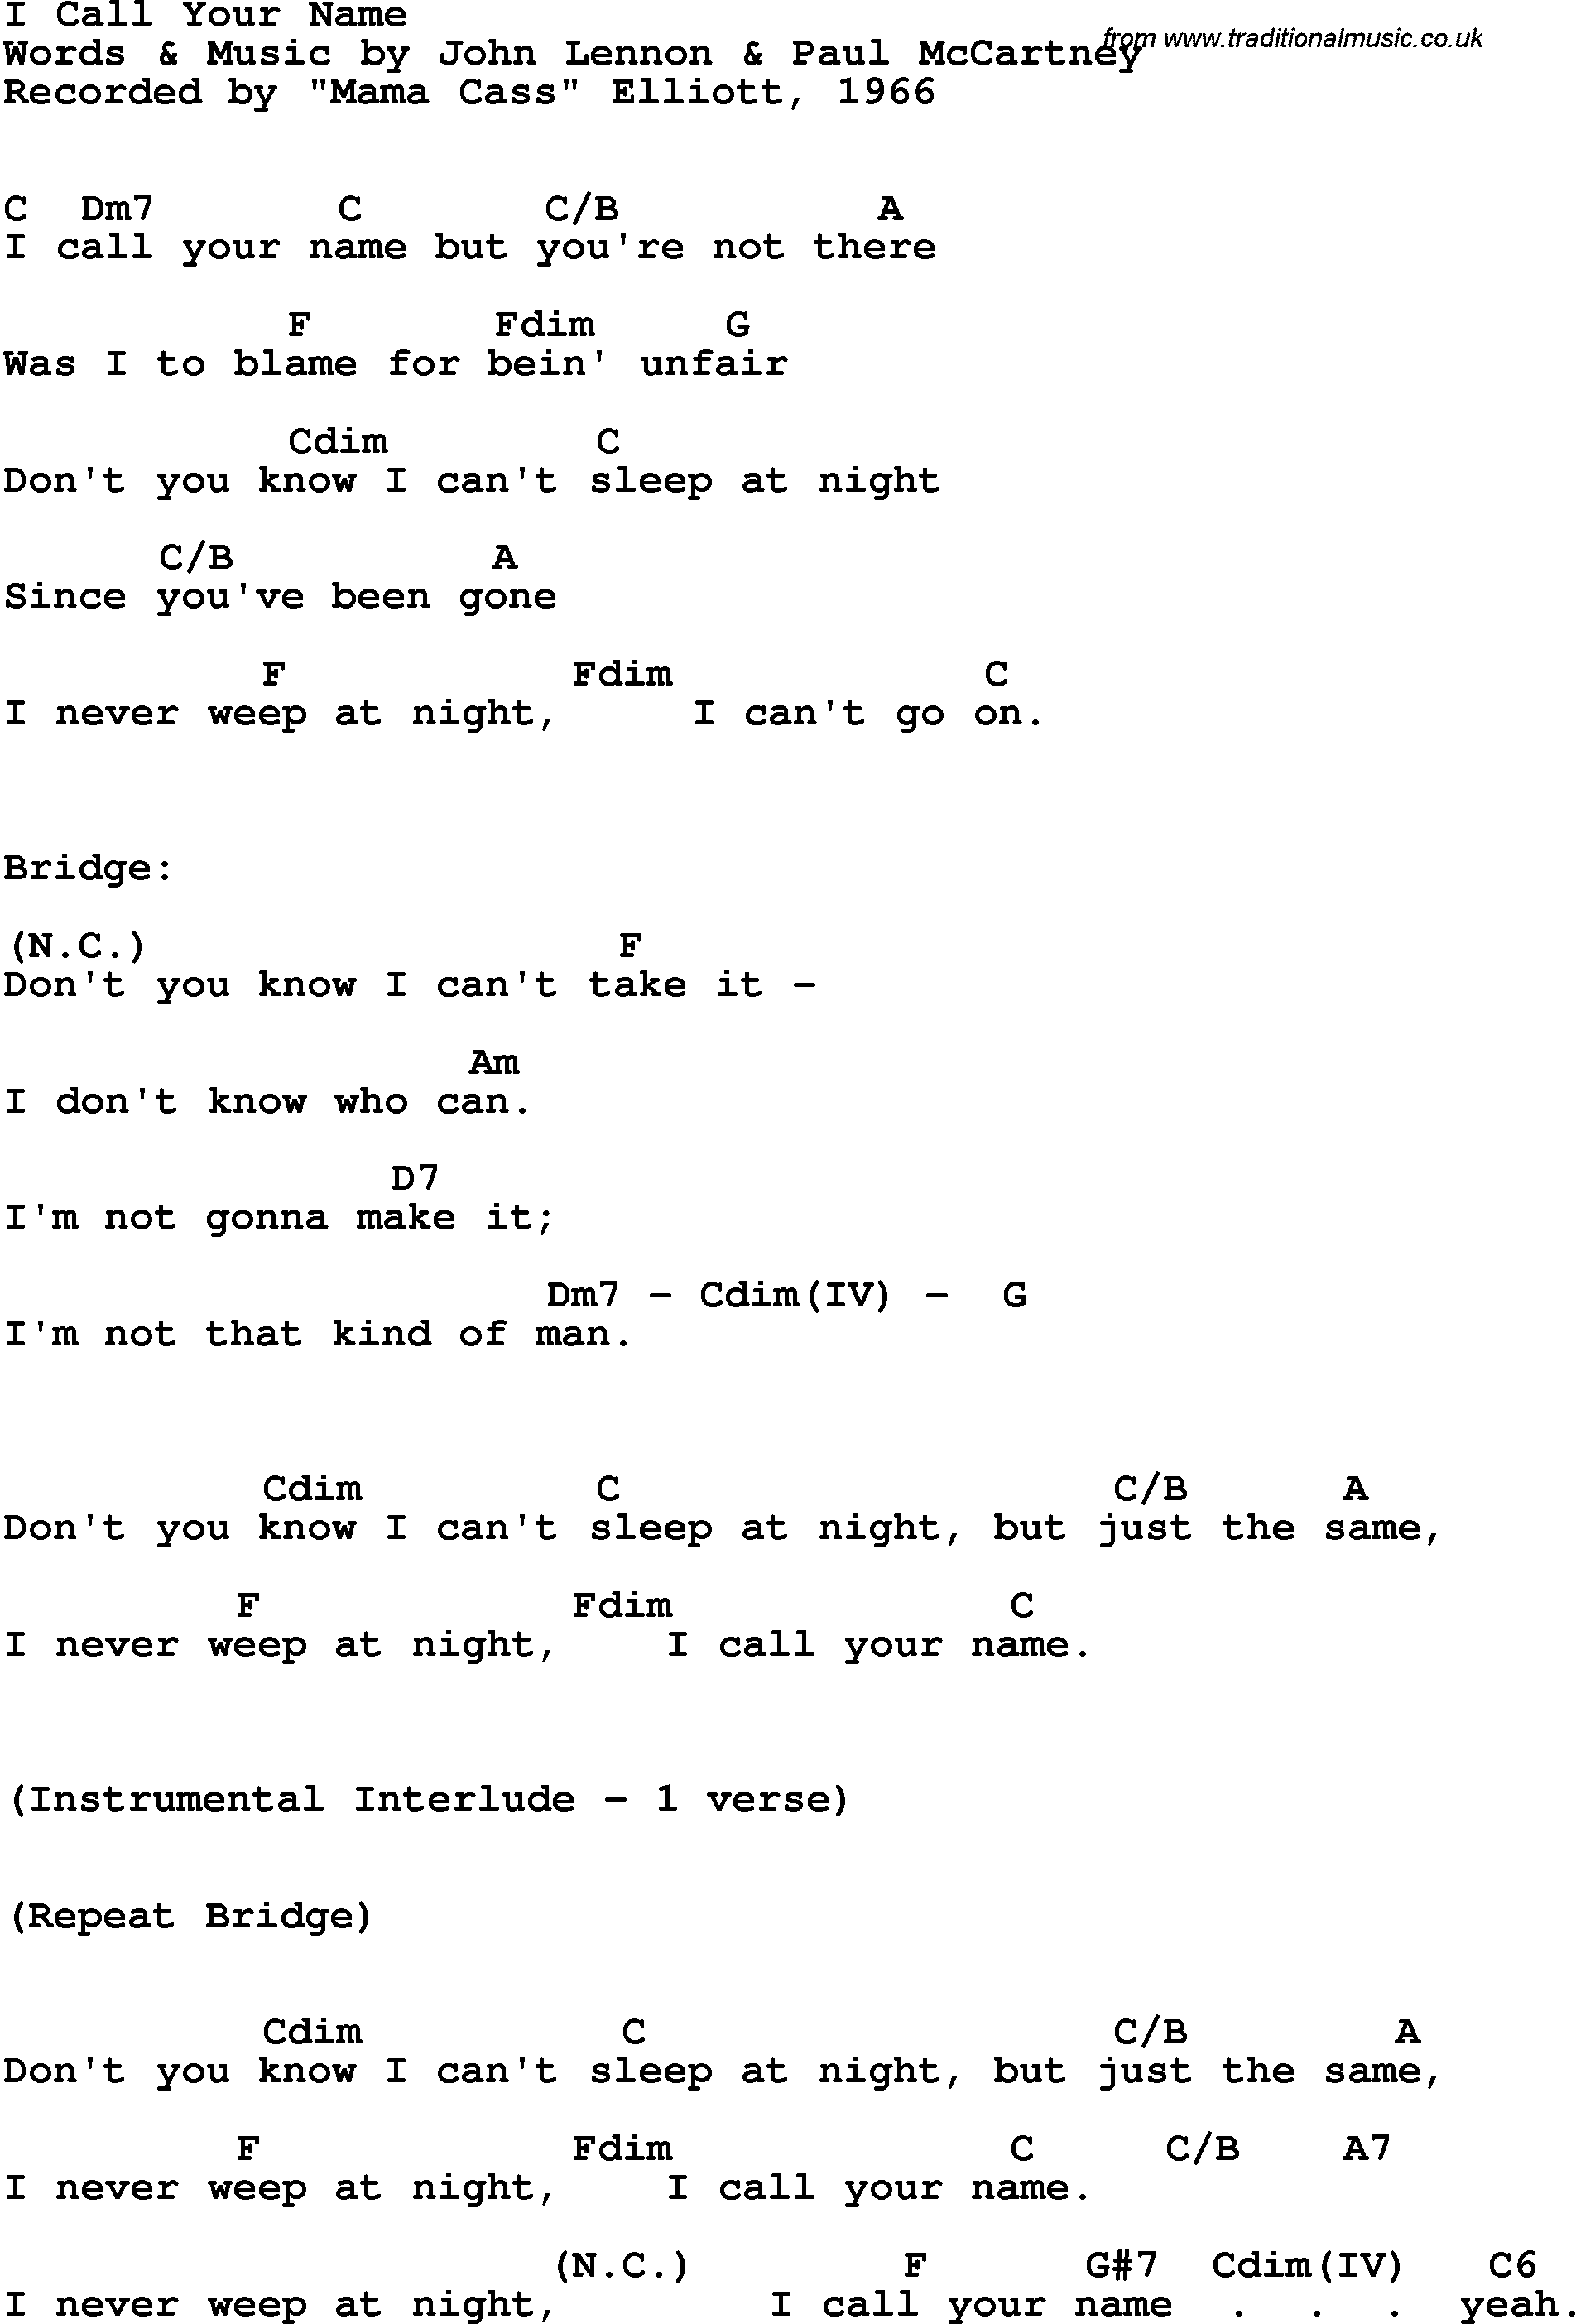 Song Lyrics with guitar chords for I Call Your Name - Mama Cass Elliott, 1966